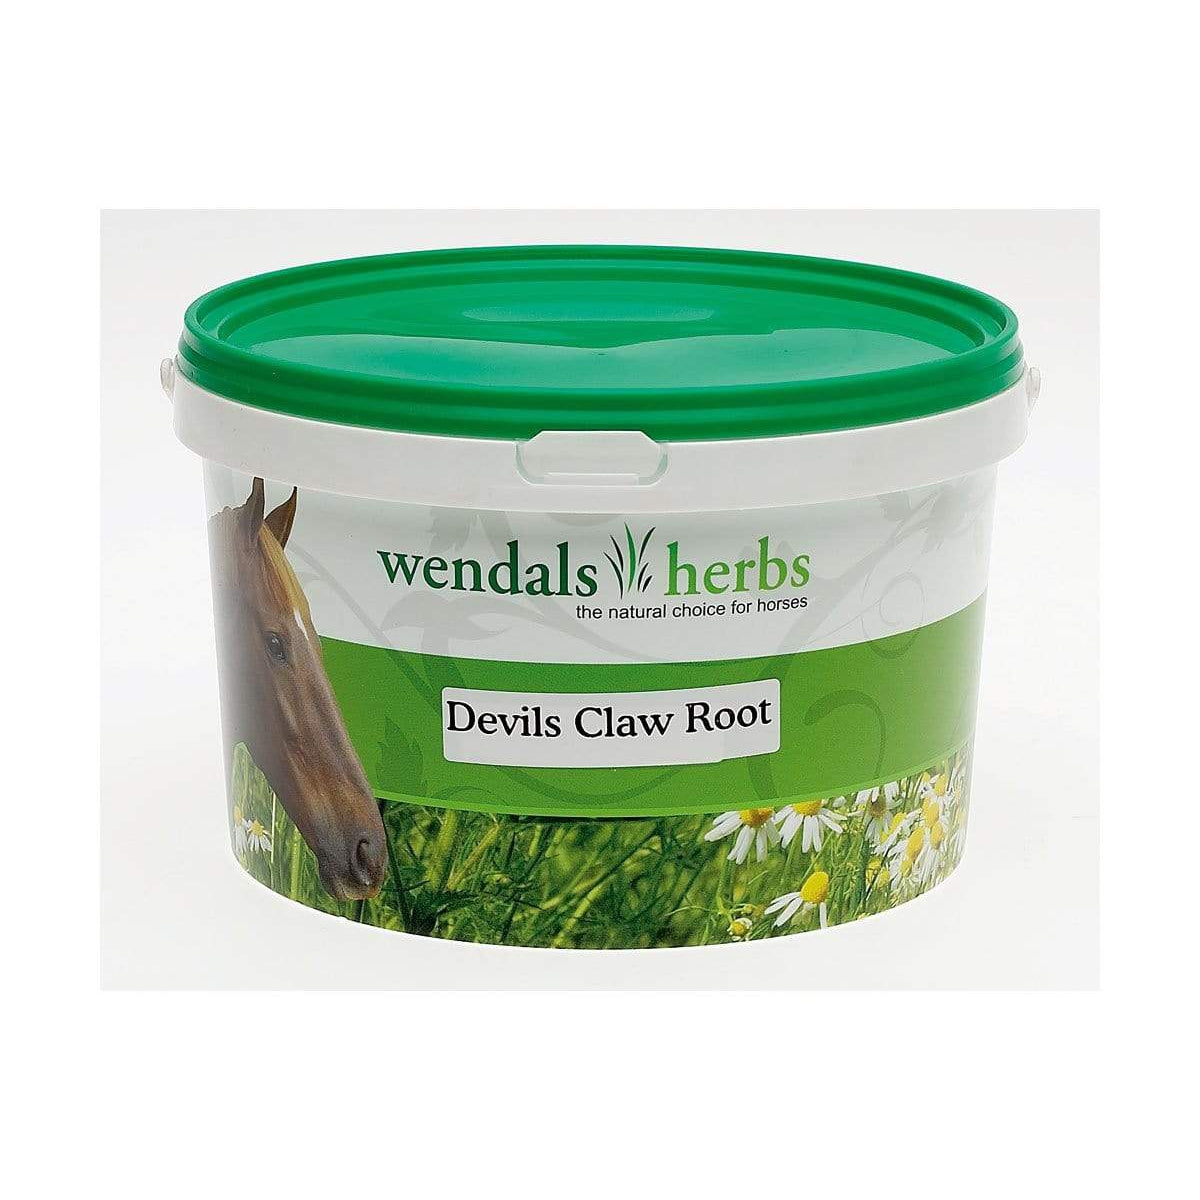 https://gsequestrian.co.uk/cdn/shop/products/PR-6605-Wendals-Devils-Claw-Root-01_1200x.jpg?v=1583861722